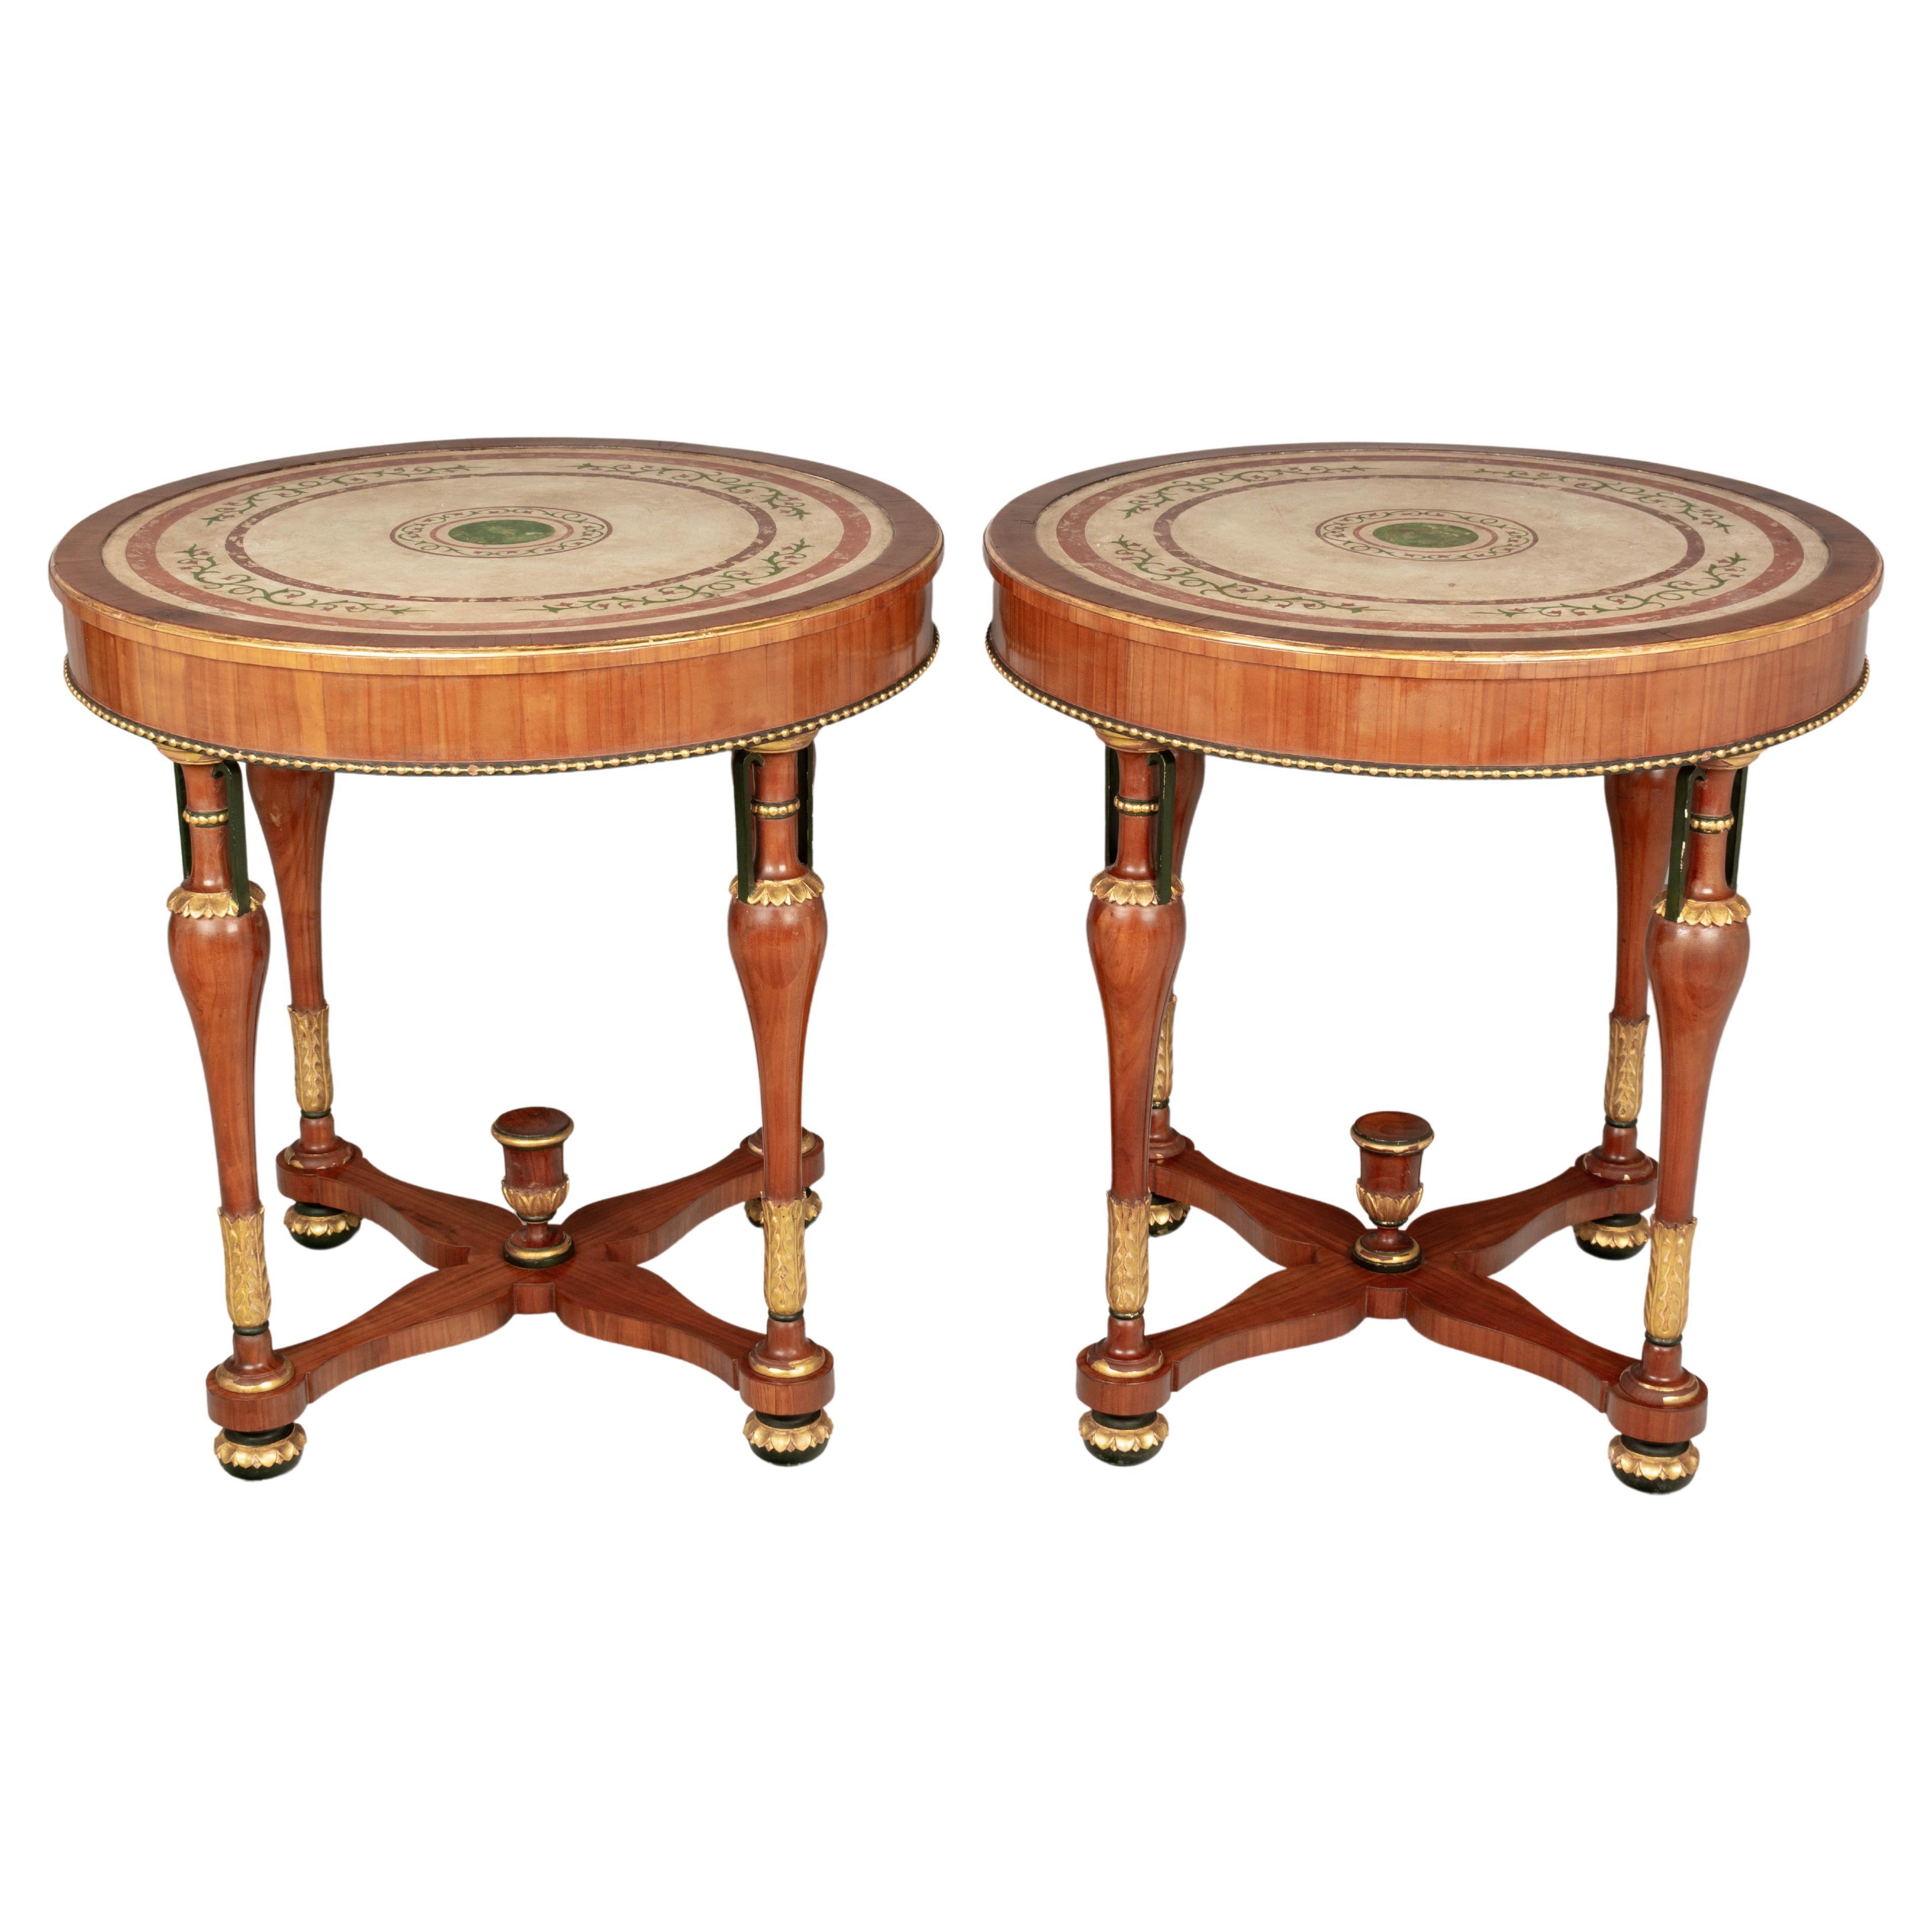 Pair of Italian Neoclassical Scagliola Top Center Tables For Sale